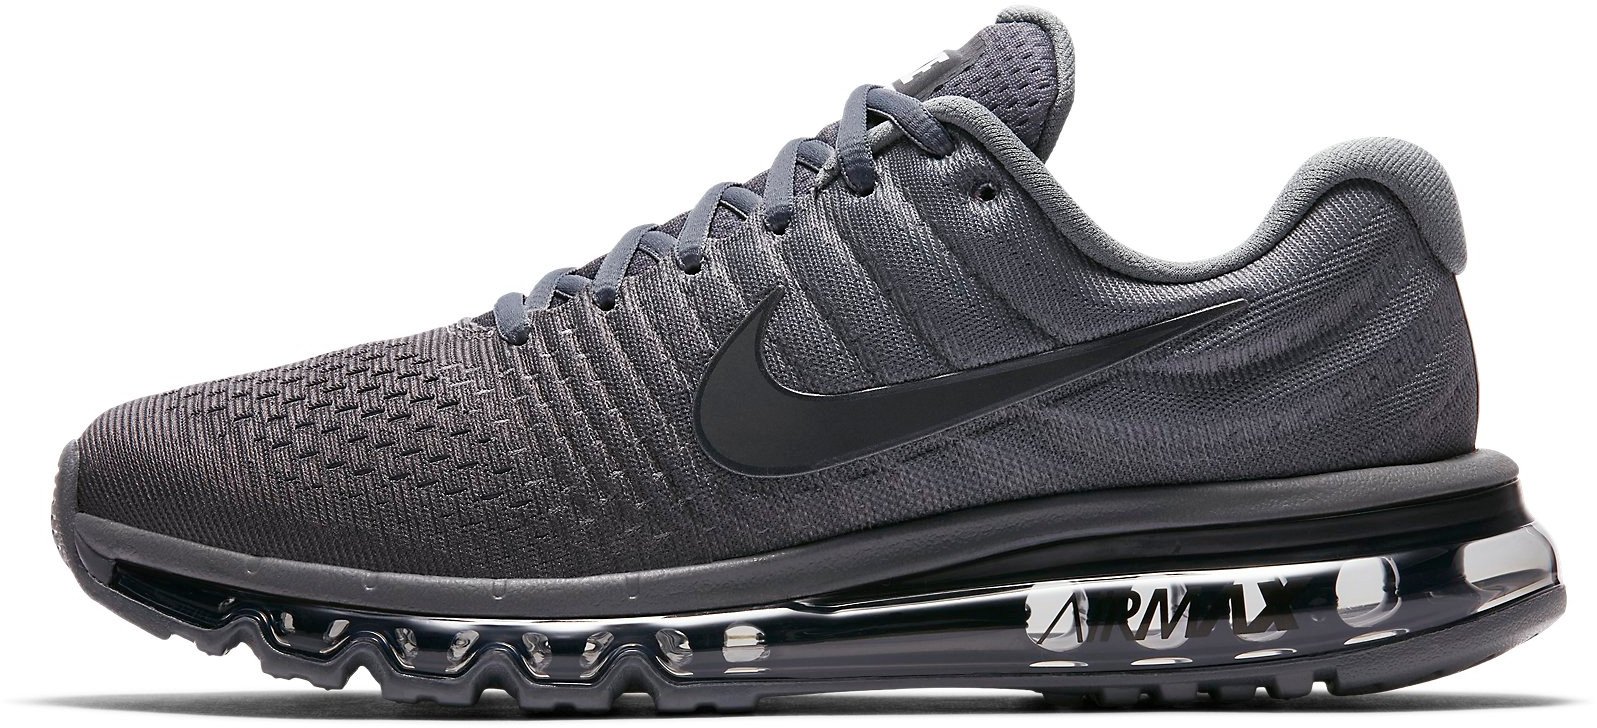 Running shoes Nike AIR MAX 2017 - Top4Fitness.com